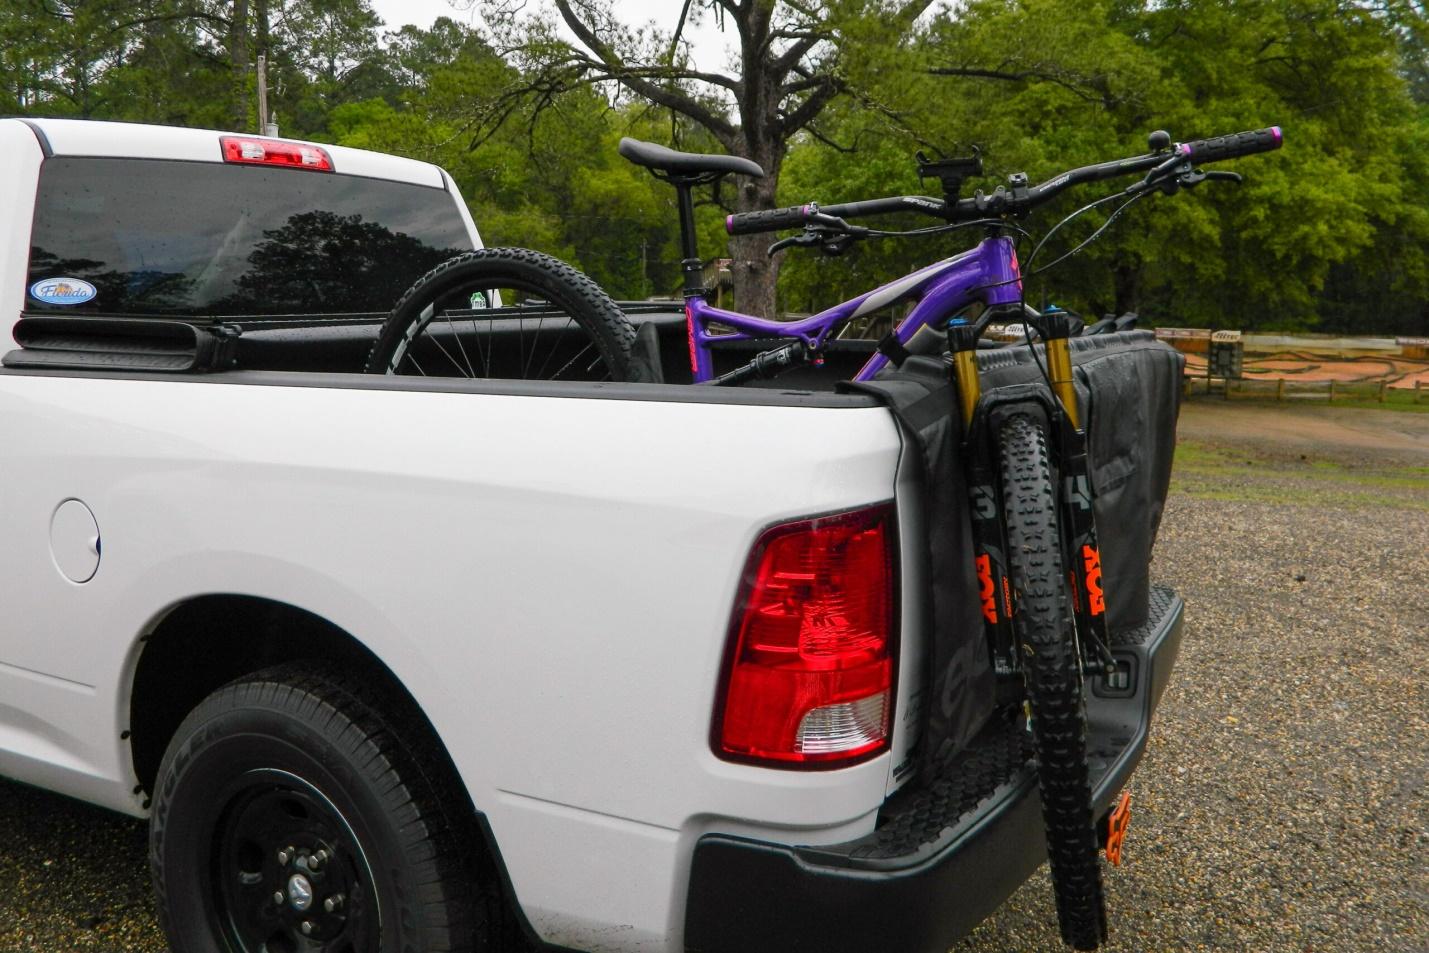 How to use a tailgate pad for bikes?